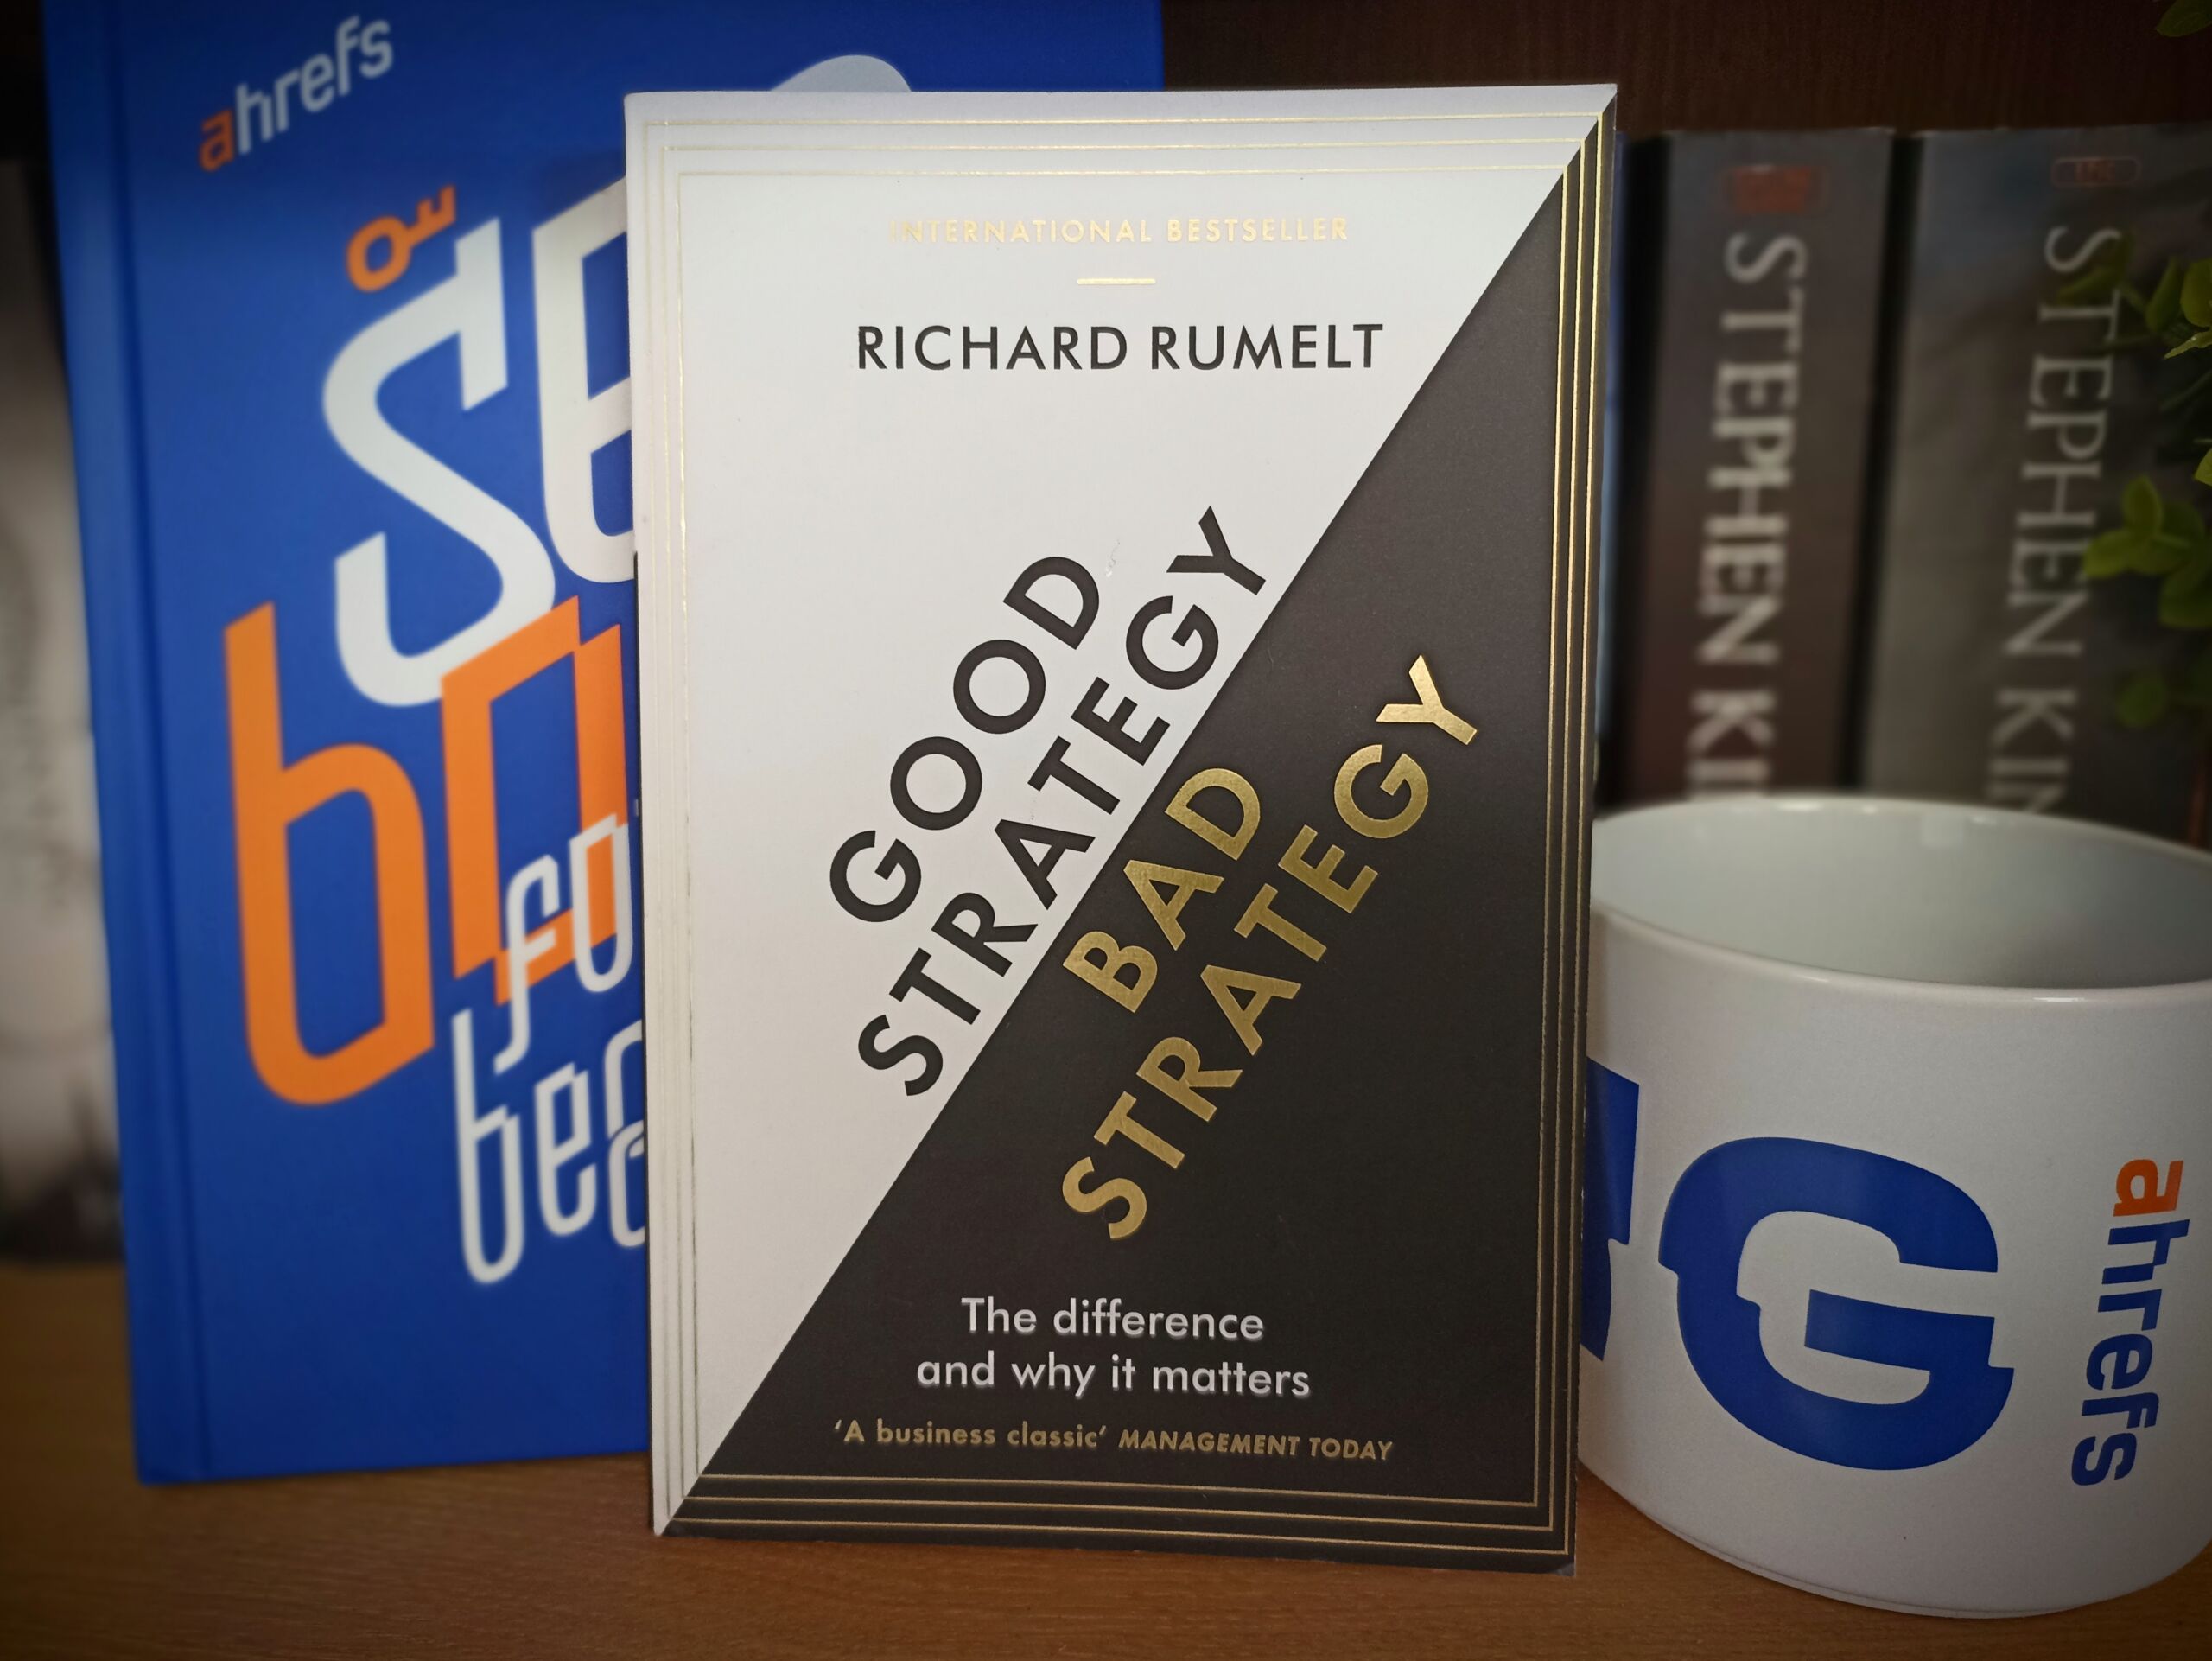 My copy of the book Good Strategy, Bad Strategy by Richard Rumelt